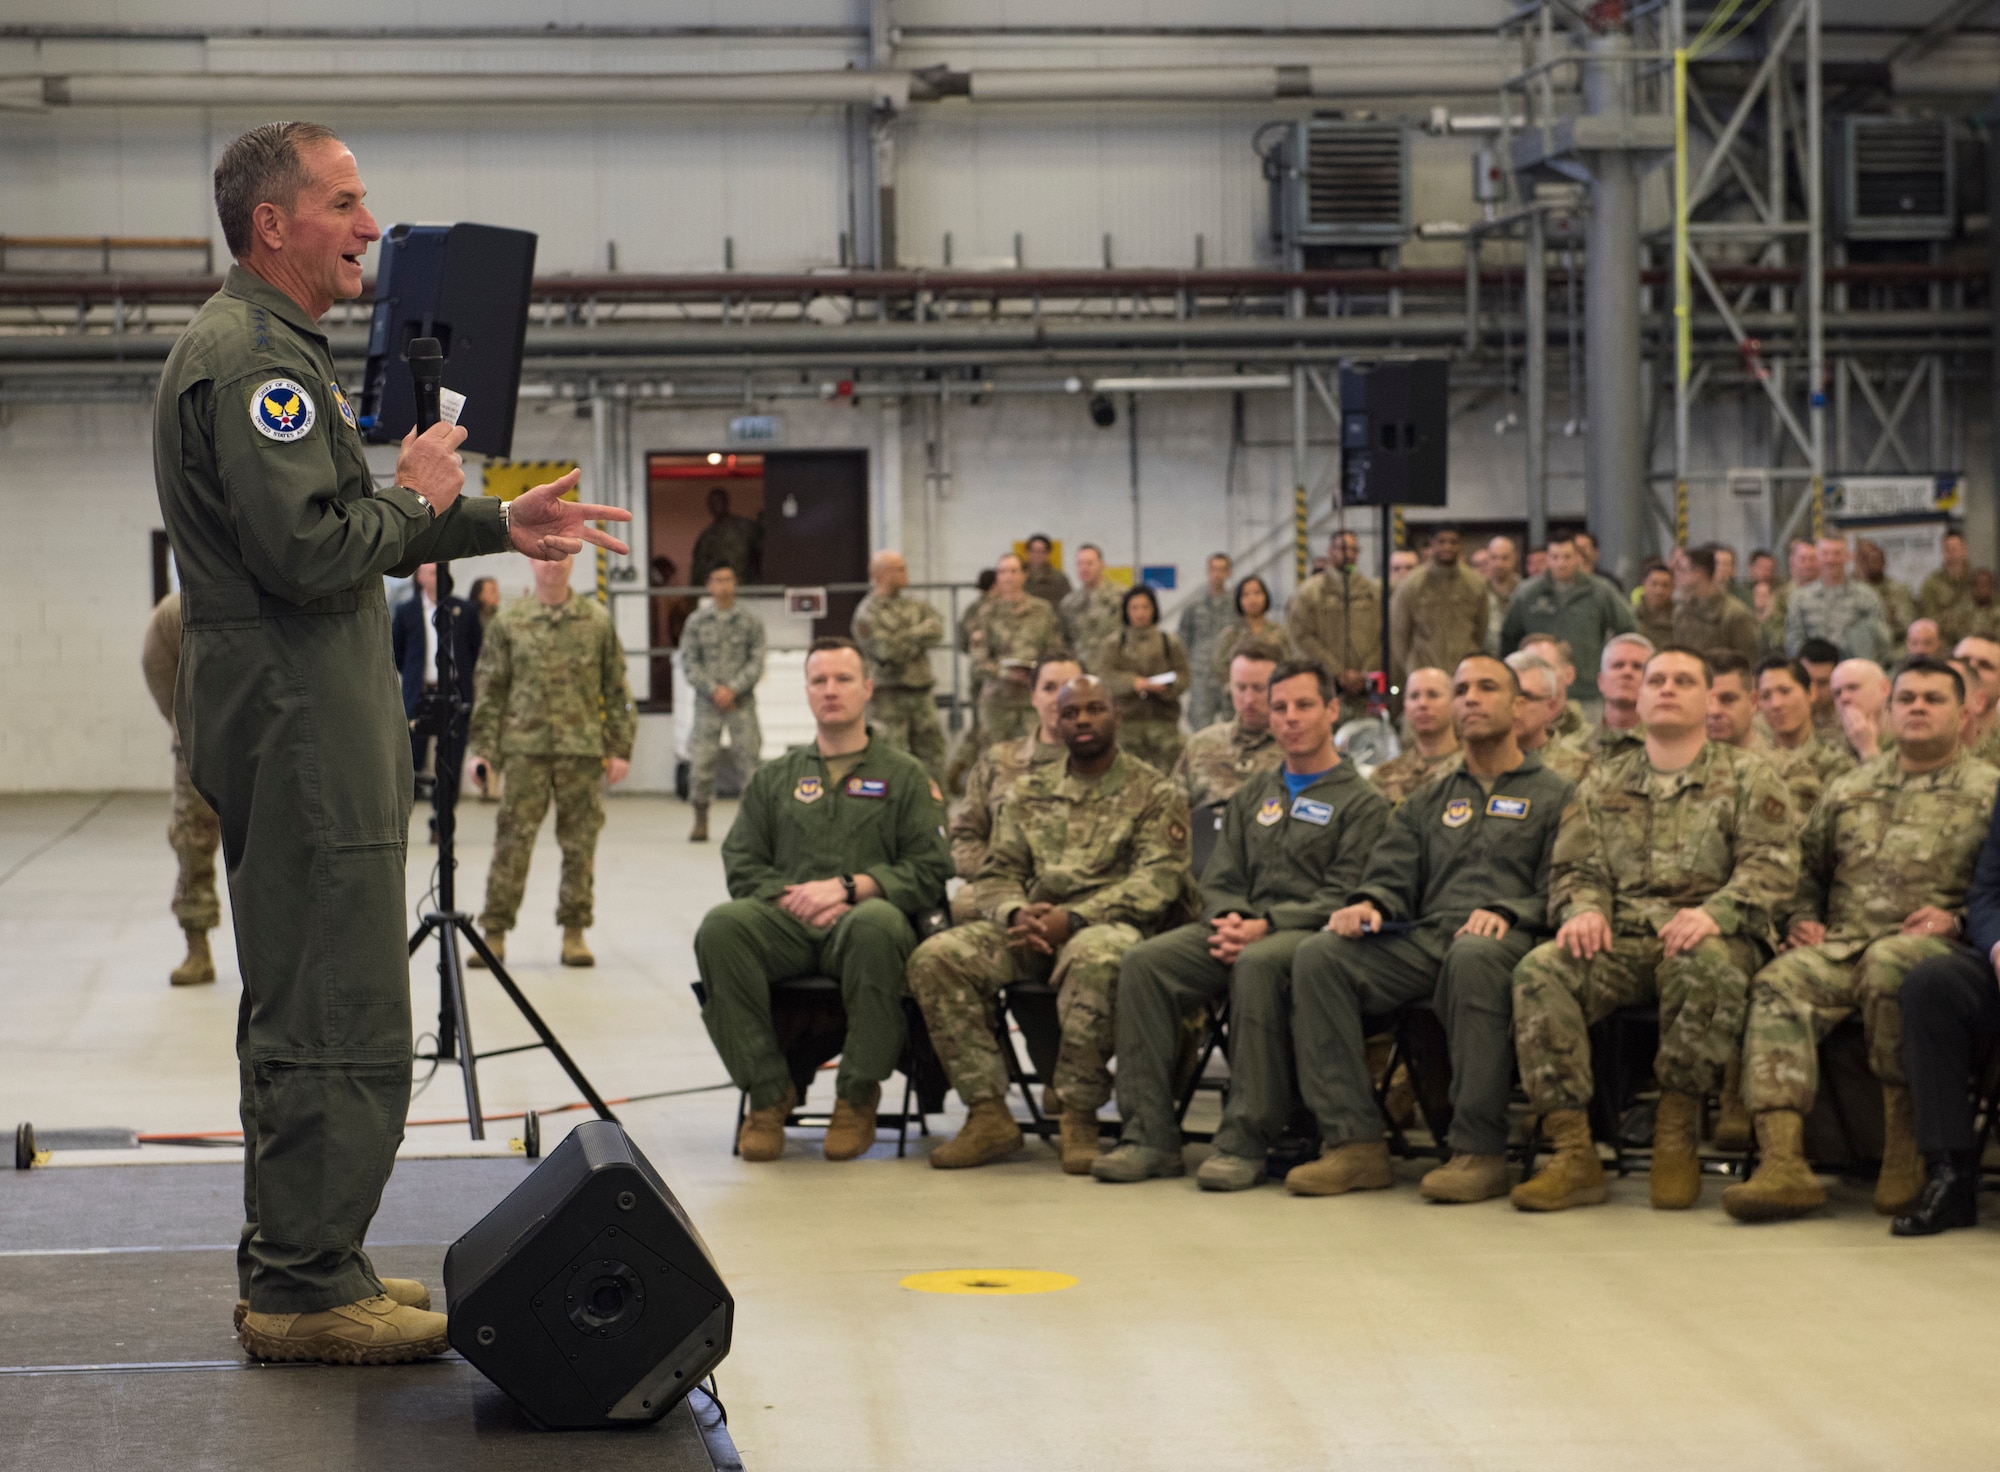 Air Force Chief of Staff Gen. David L. Goldfein addresses Airmen during a town hall on Ramstein Air Base, Germany, Nov. 22, 2019.